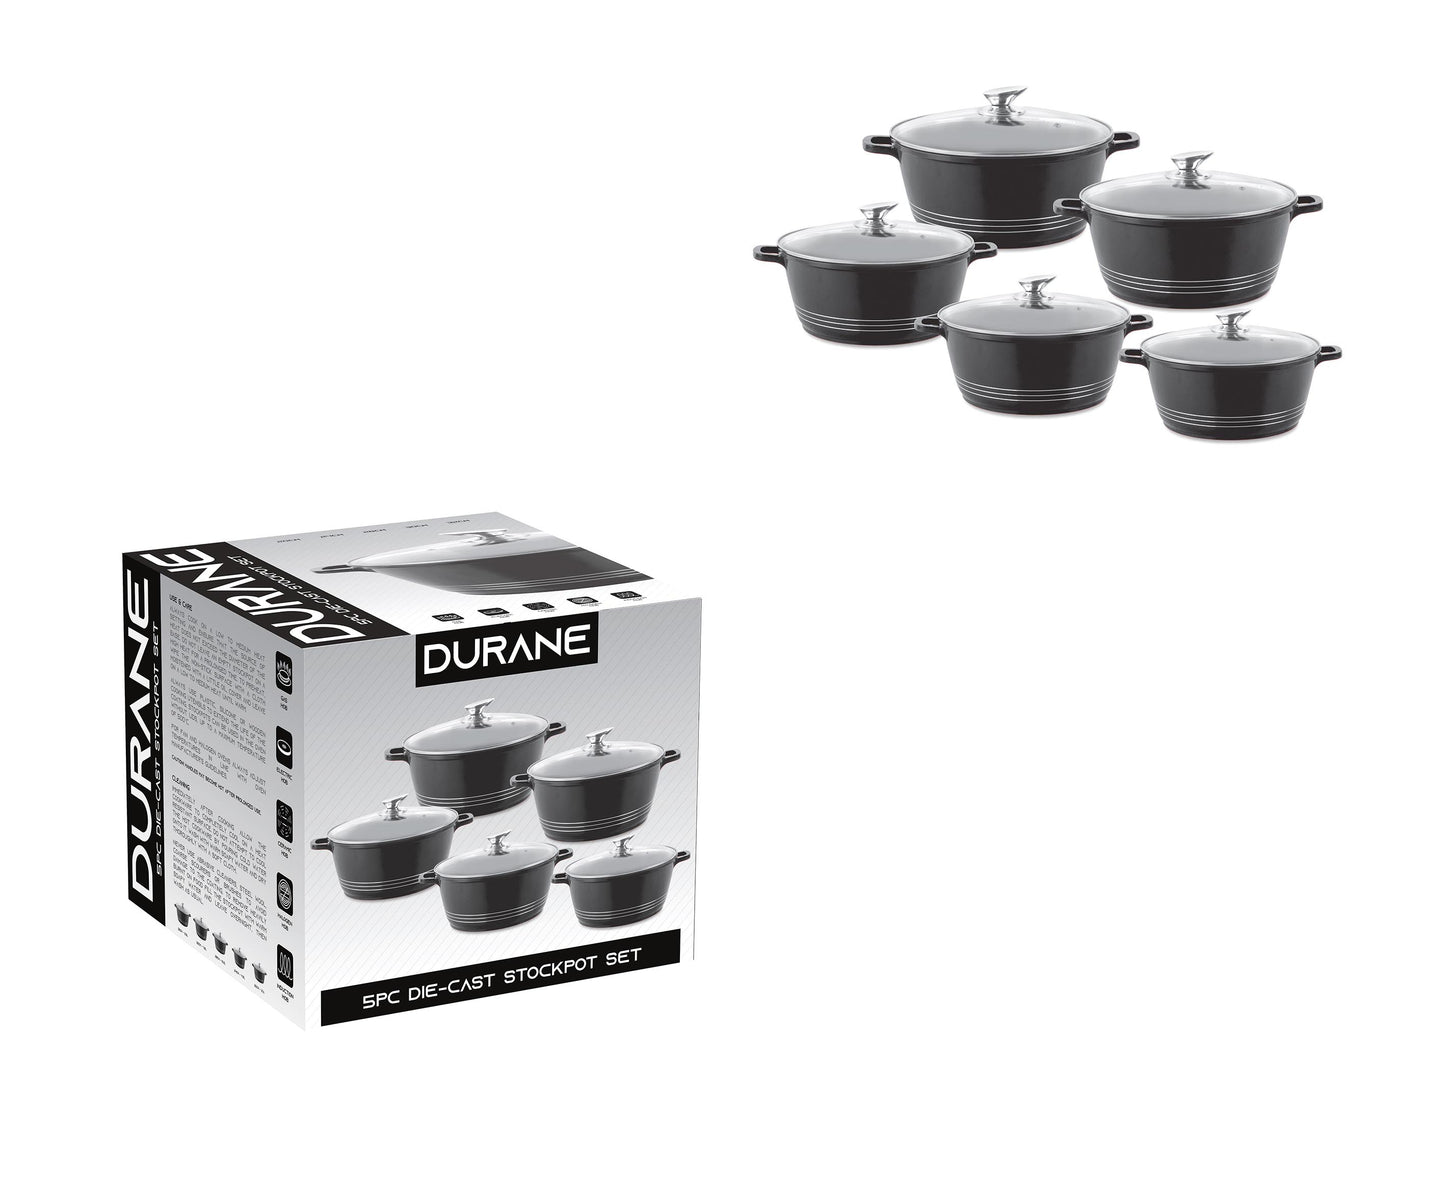 Durane Die Cast Stock Pot Set Of 5 Stainless Steel Non Stick Coating And Handle 9317 (Big Parcel Rate)